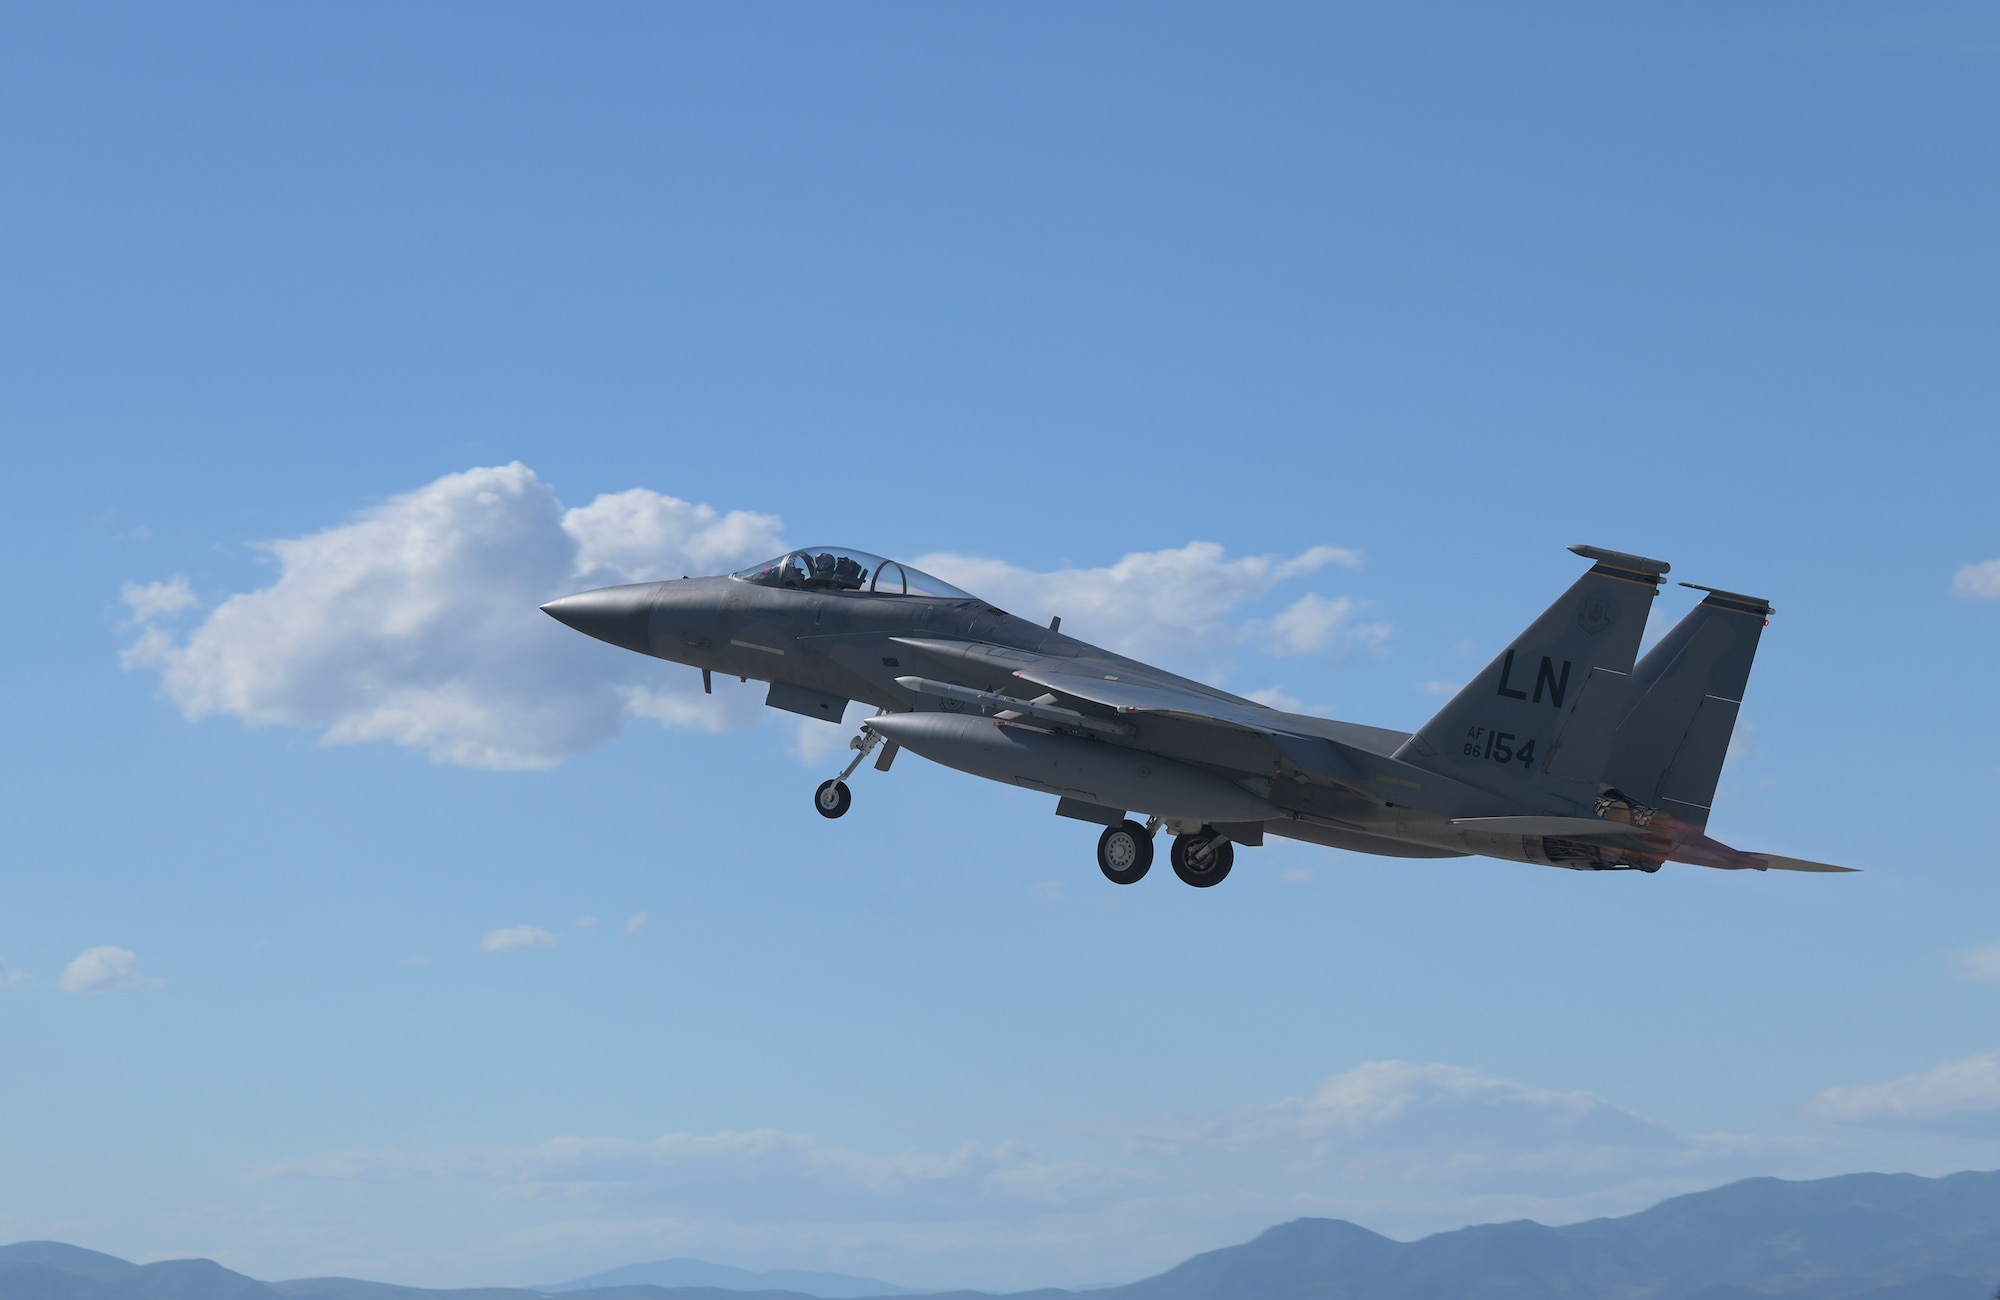 A U.S. Air Force F-15C Eagle assigned to the 493rd Fighter Squadron takes off during exercise Astral Knight 21 at Larissa Air Base, Greece, May 17, 2021. Astral Knight is a multinational exercise designed to enhance interoperability between the U.S. and its NATO allies. (U.S. Air Force photo by Tech. Sgt. Alex Fox Echols III)